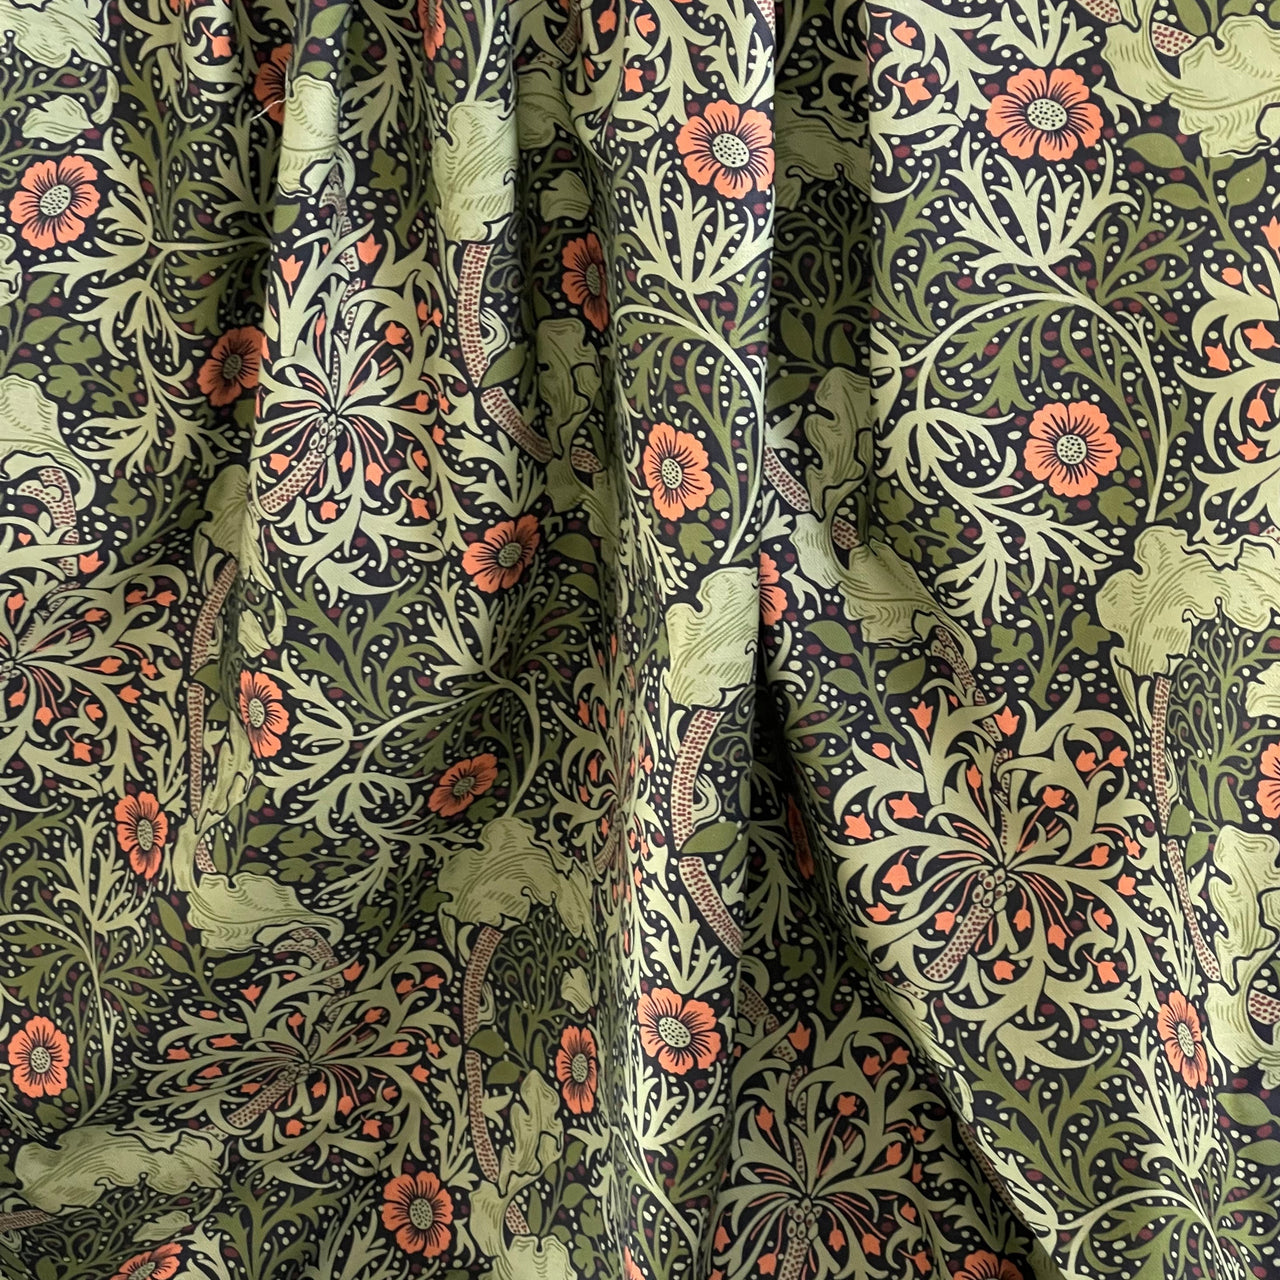 William Morris Seaweed Printed Cotton Fabric - Green and Orange - Sold by the Meter